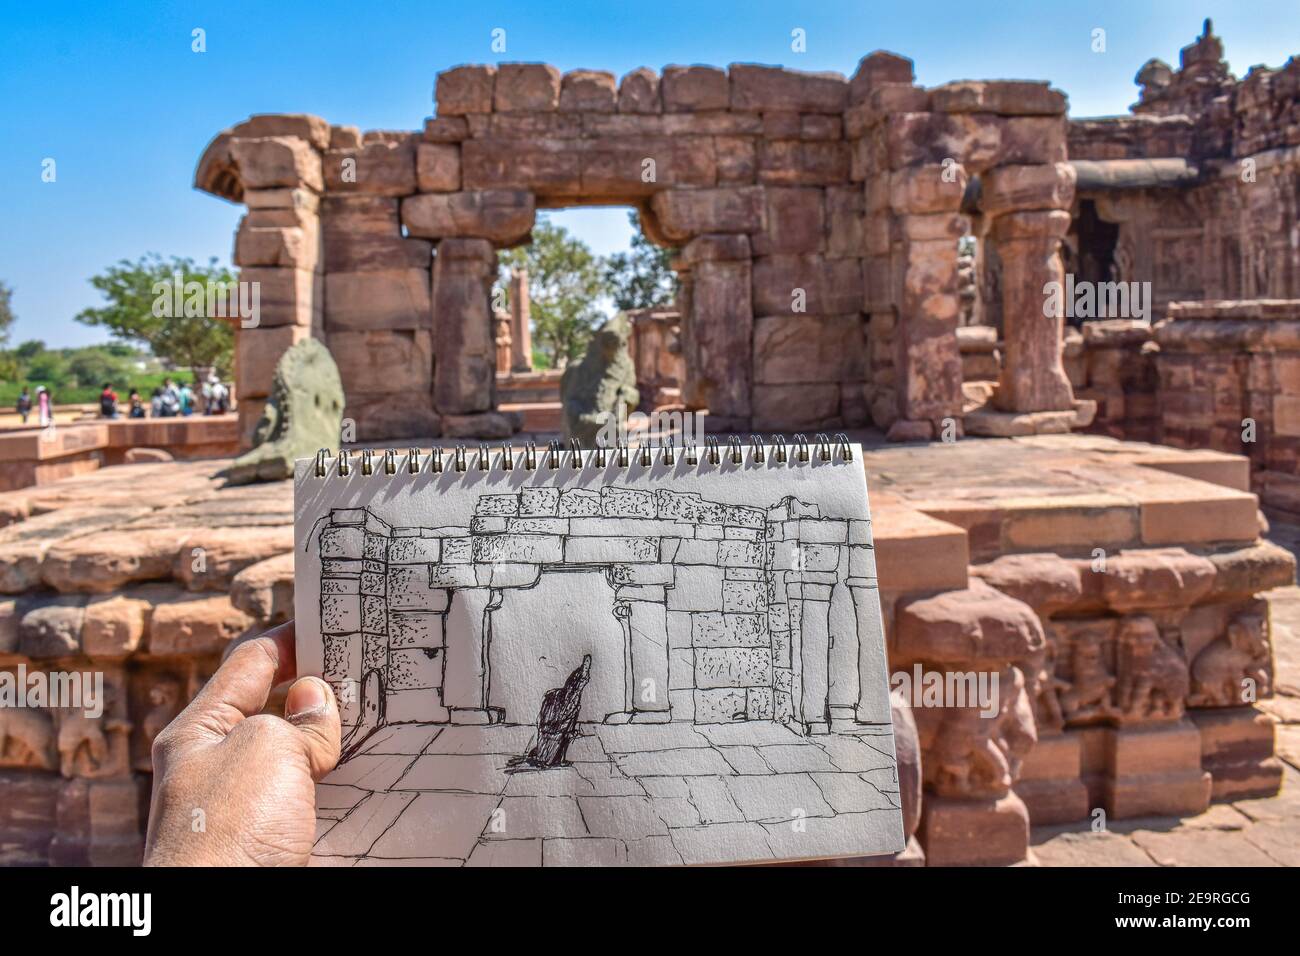 architectural sketch of brown stone mallikarjuna temple entrance with black nandi statue under blue sky Stock Photo